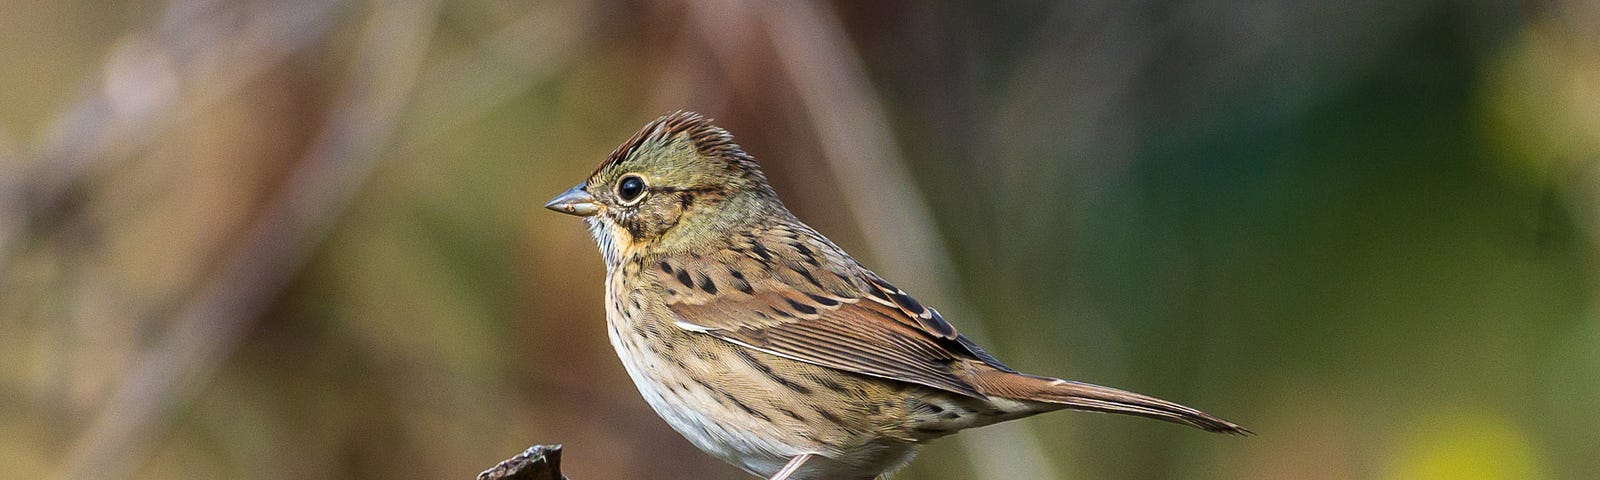 Lincoln’s Sparrow photographed in Rochester, Minnesota, USA.